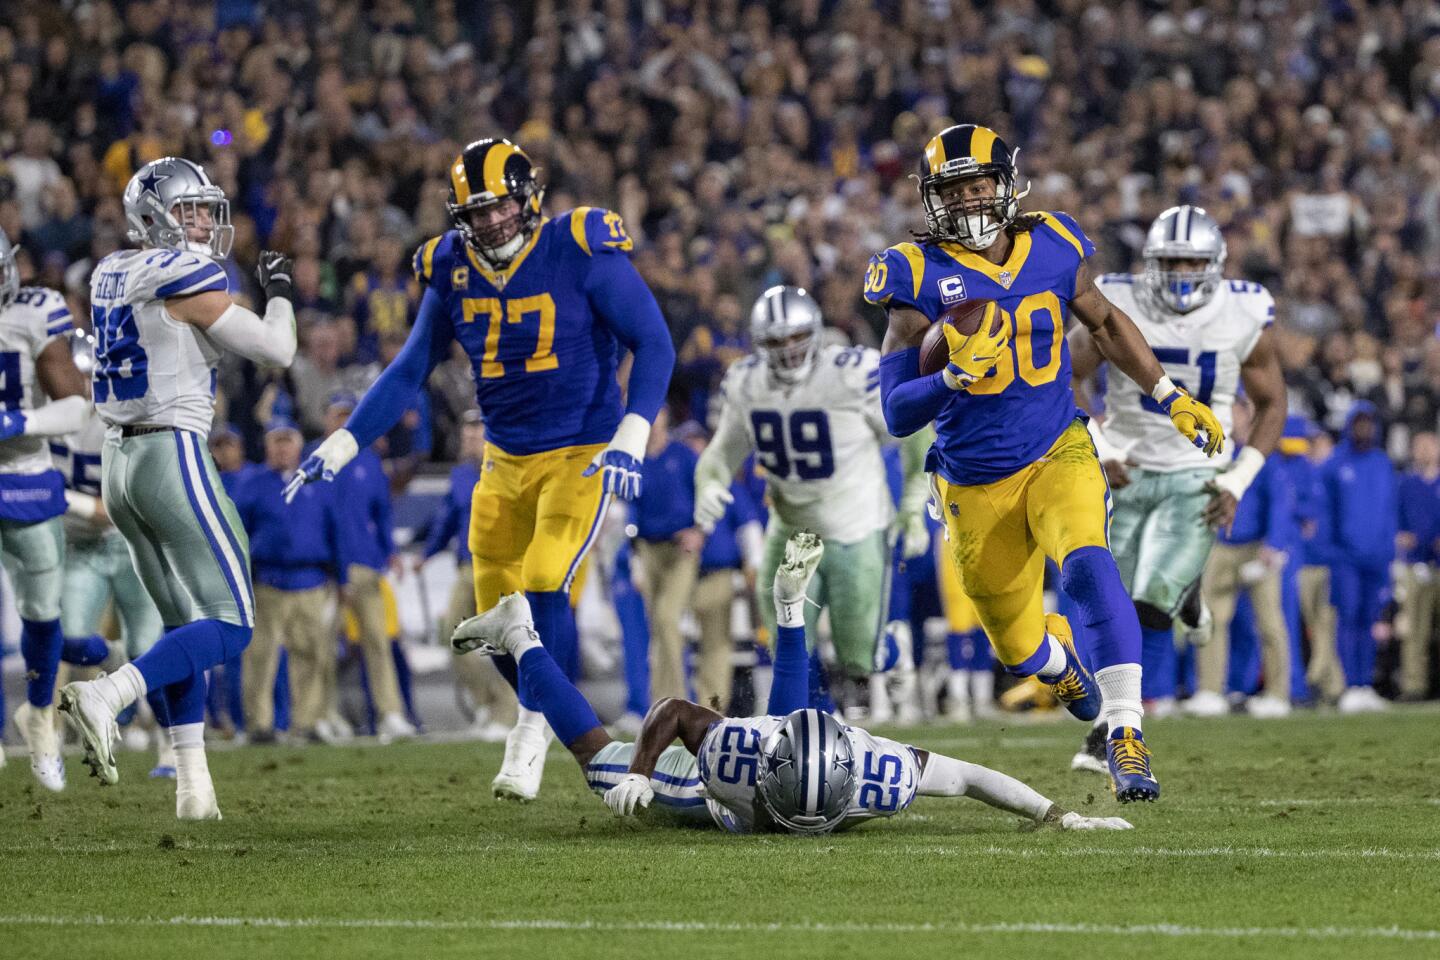 Rams running back Todd Gurley (30) breaks through the tackle attempt of Cowboys free safety Xavier Woods (25) to score on a 35-yard run during the second quarter.